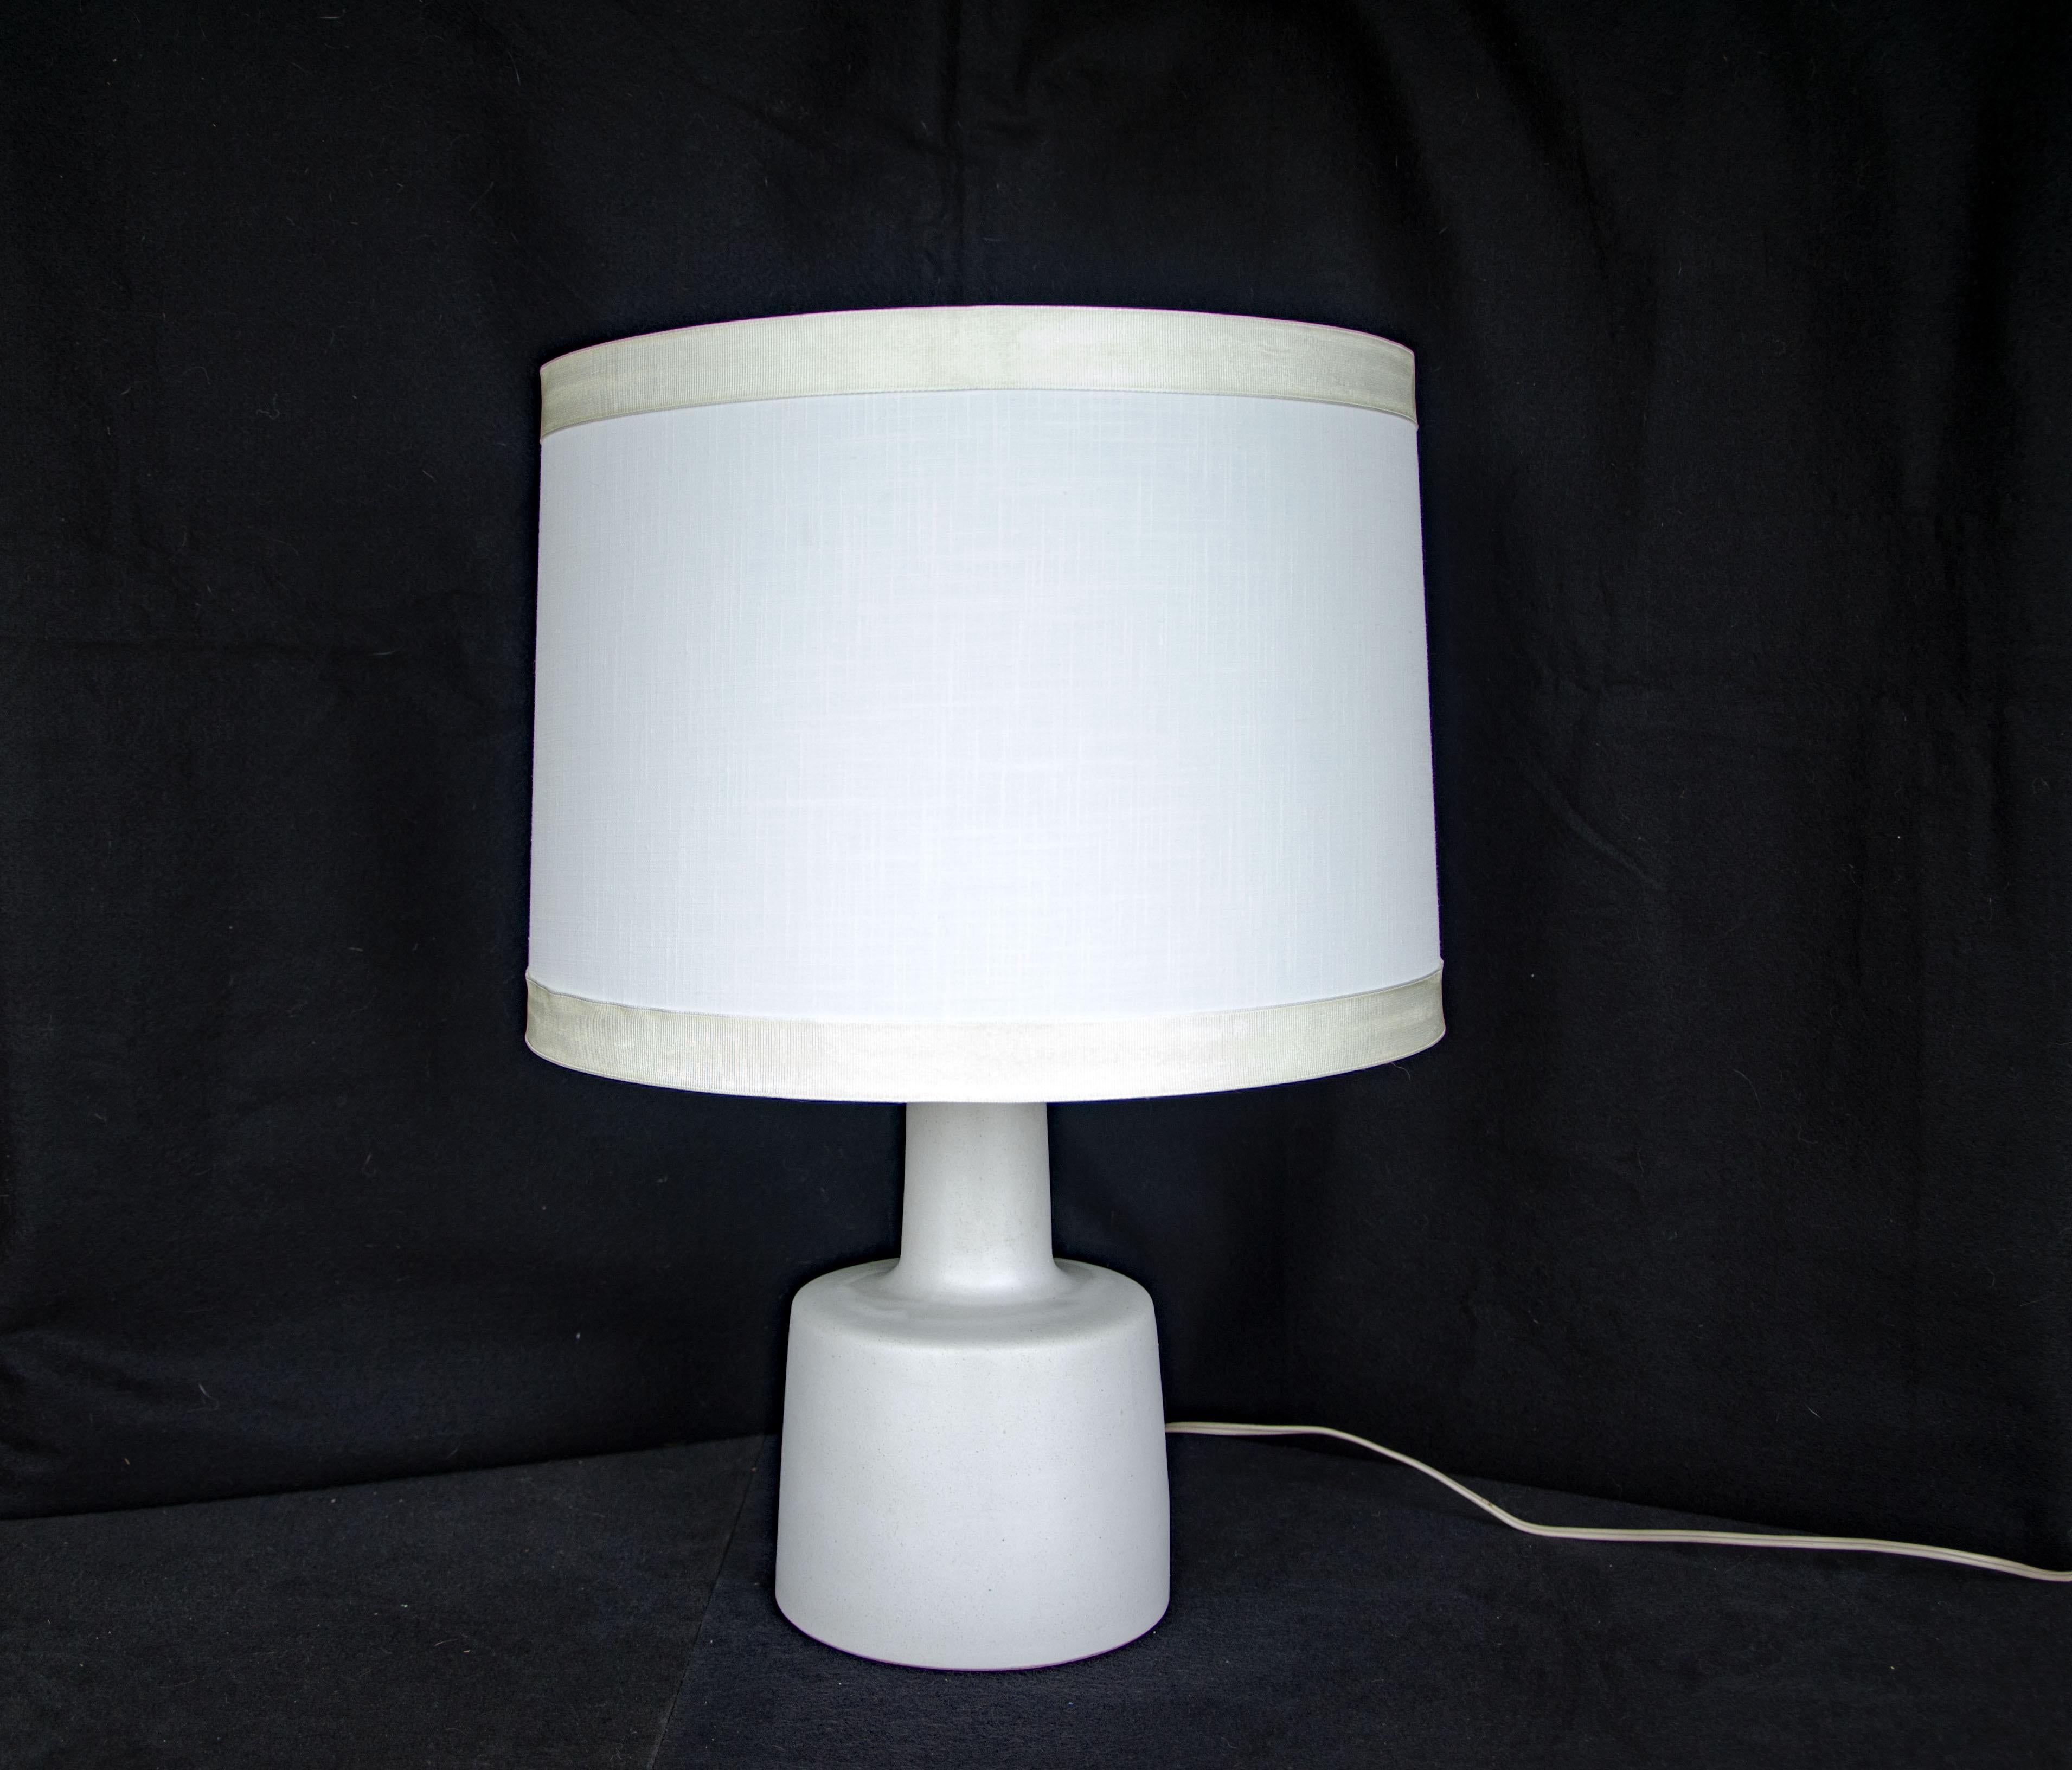 Very nice smaller size table lamp with an antique white ceramic base and signature walnut finial. The Martz signature is on the back of the ceramic base near the cord. A perfect lamp for a desk, dresser, or bedside table. The white base has a matte